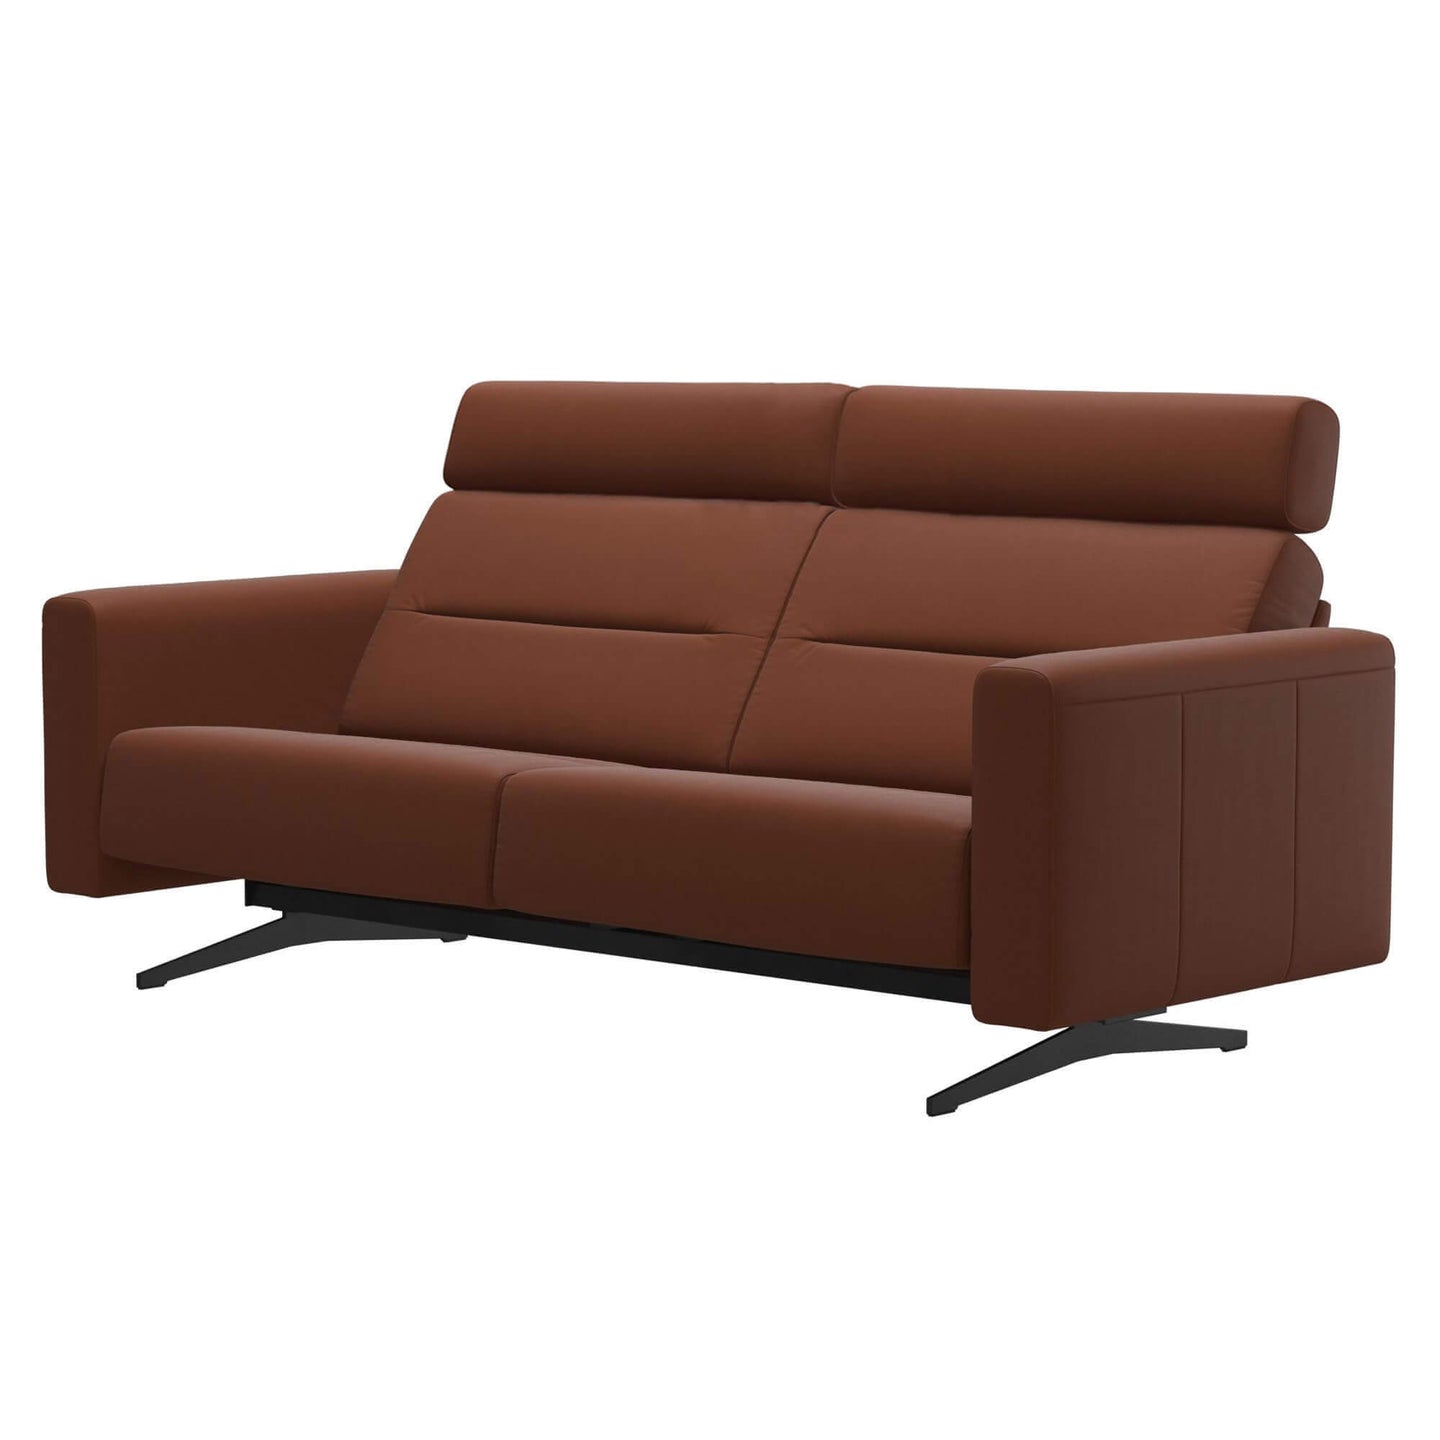 Stressless 2.5 Seater Stella Sofa With 2 Headrests In Paloma Copper - Black Feet